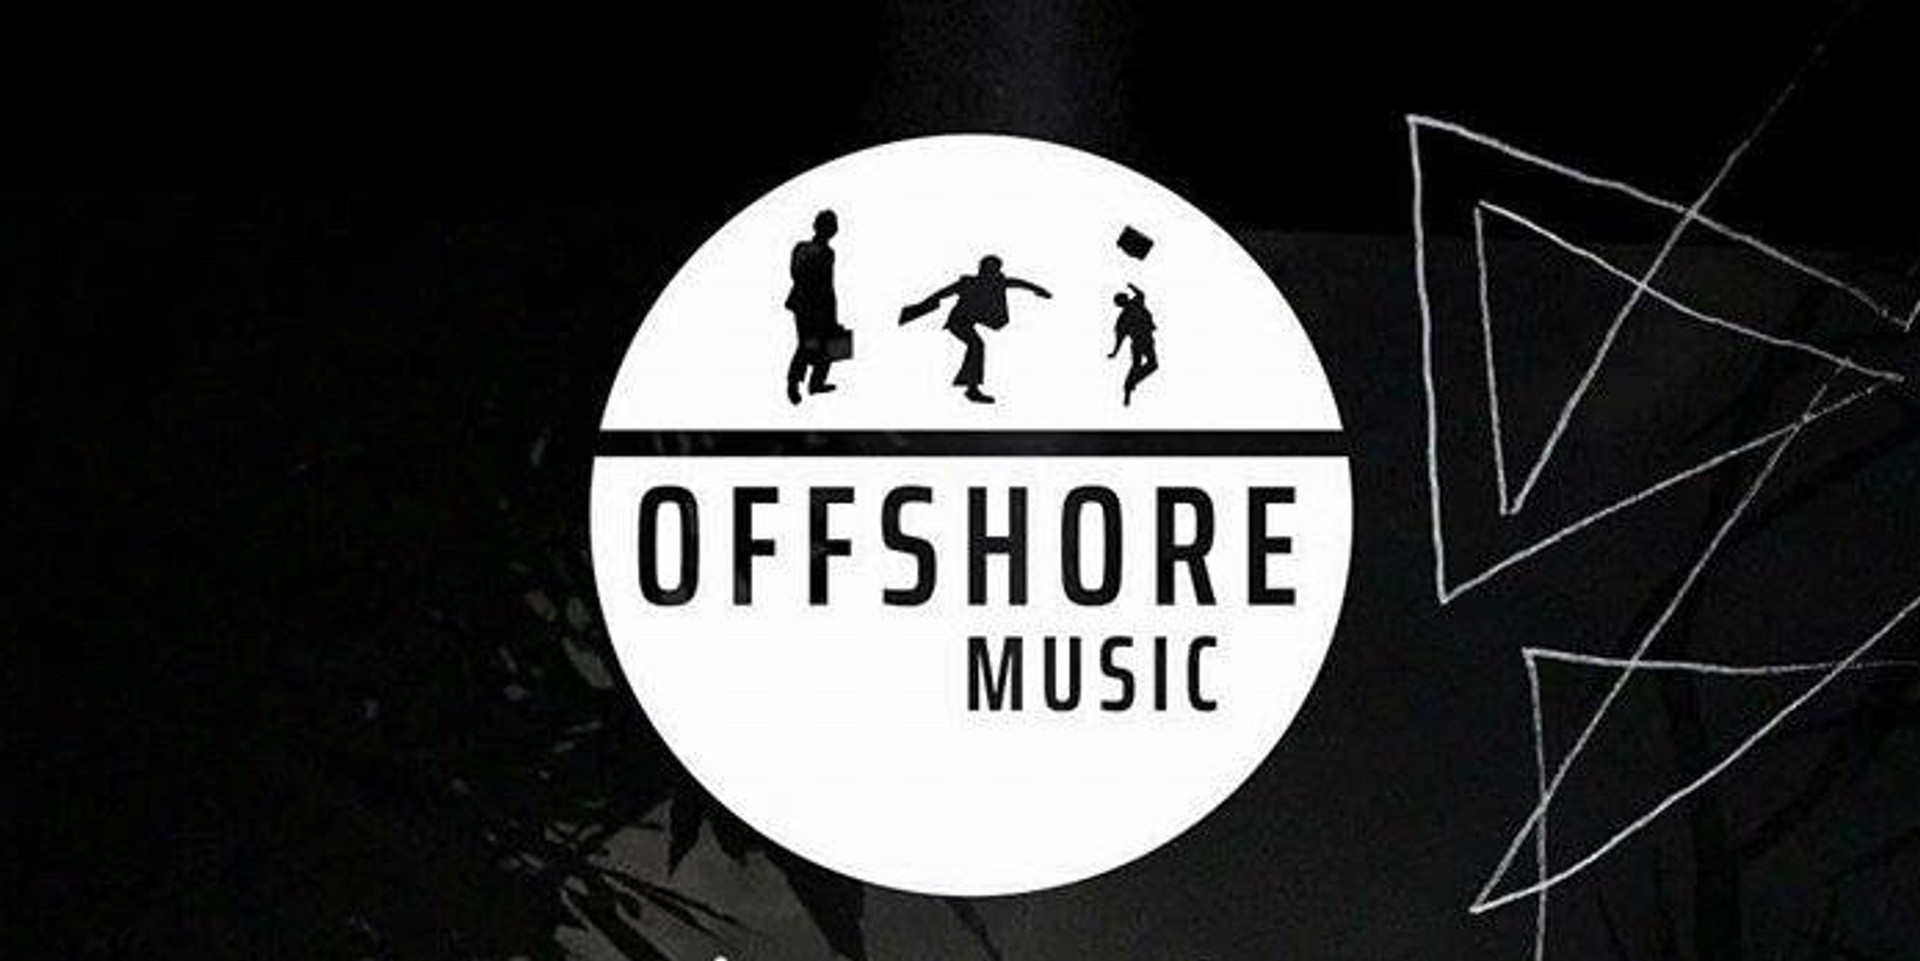 Independent record label Offshore Music focuses on vinyl releases